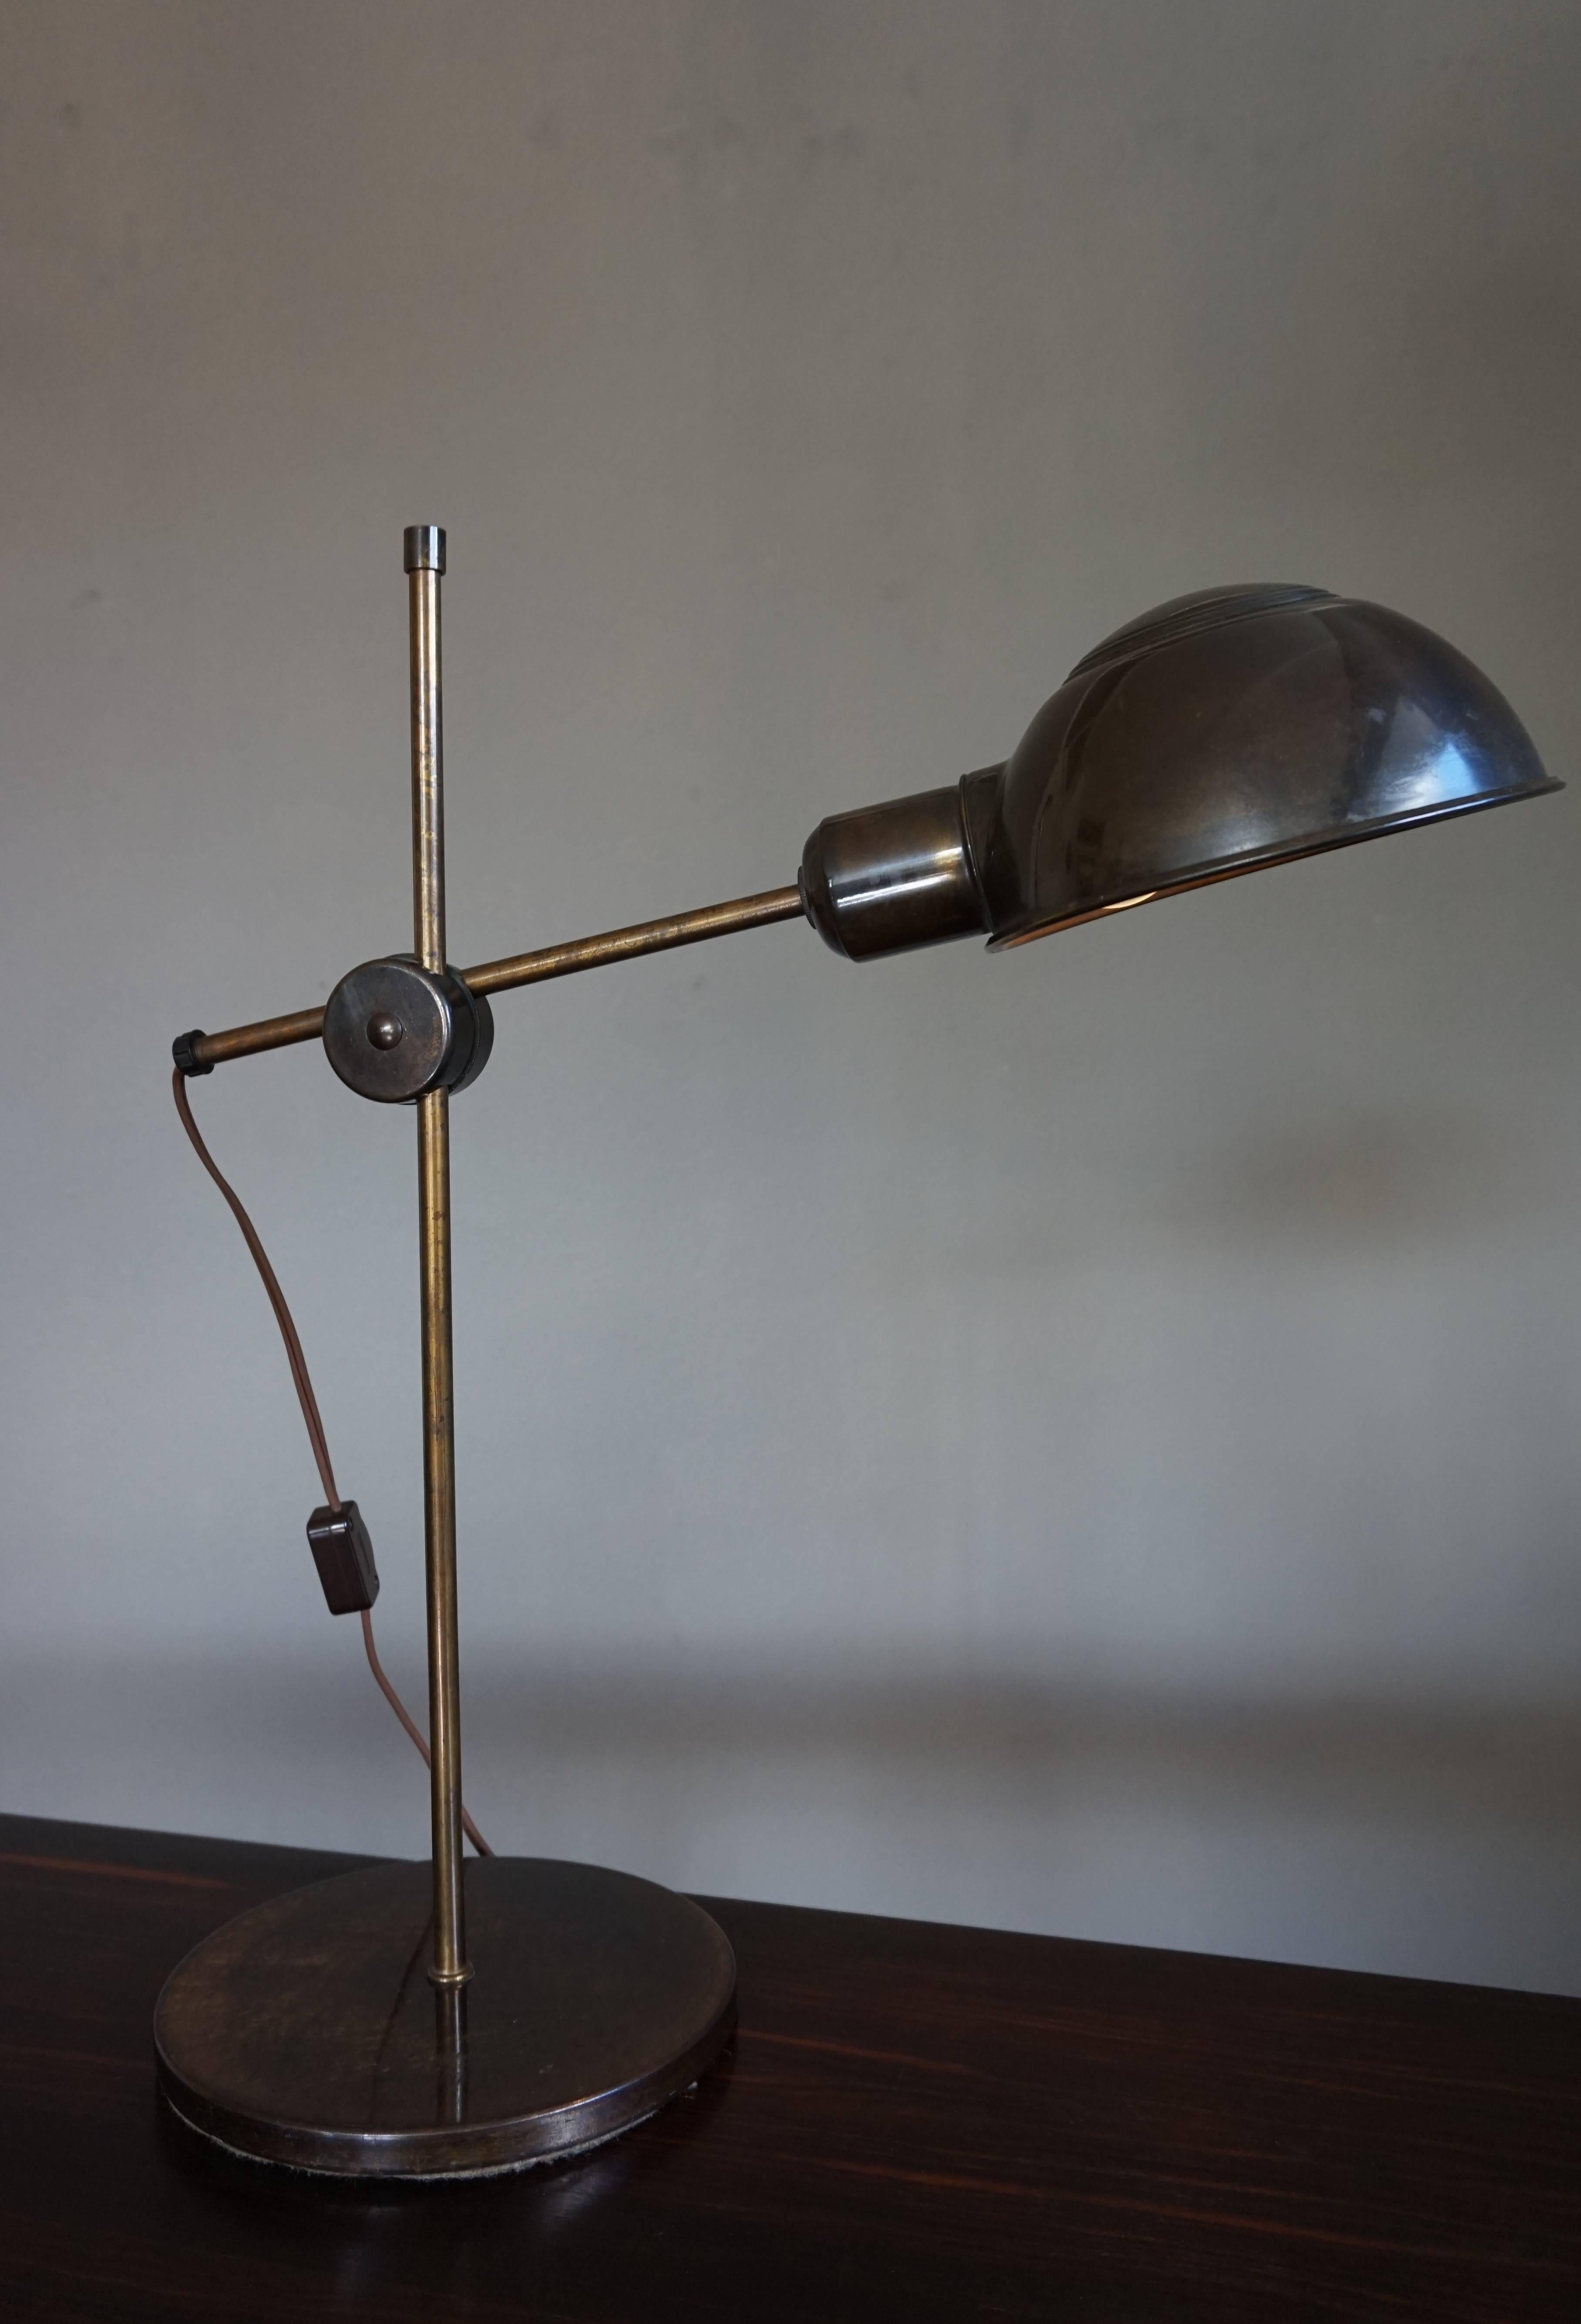 Unique on 1stdibs and very rare in the world.

This timeless and stylish table or desk lamp dates from the Mid-Century Modern era. By turning the butterfly nut, the arm with the lampshade can be moved forward, backward, up, down and to all sides.